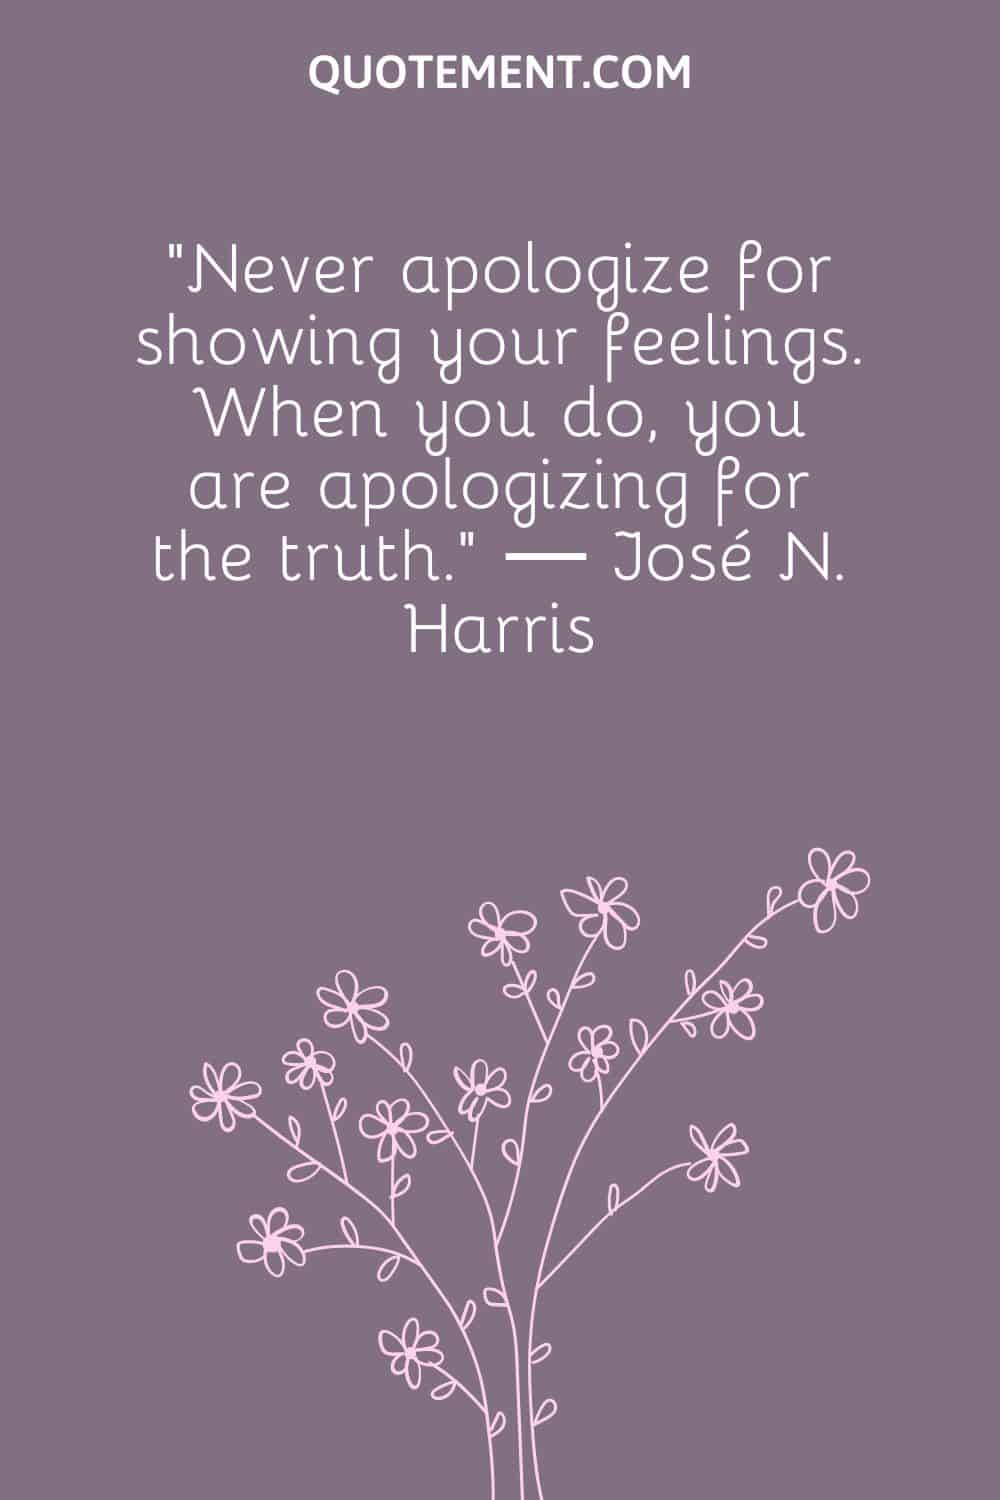 “Never apologize for showing your feelings. When you do, you are apologizing for the truth.” ― José N. Harris